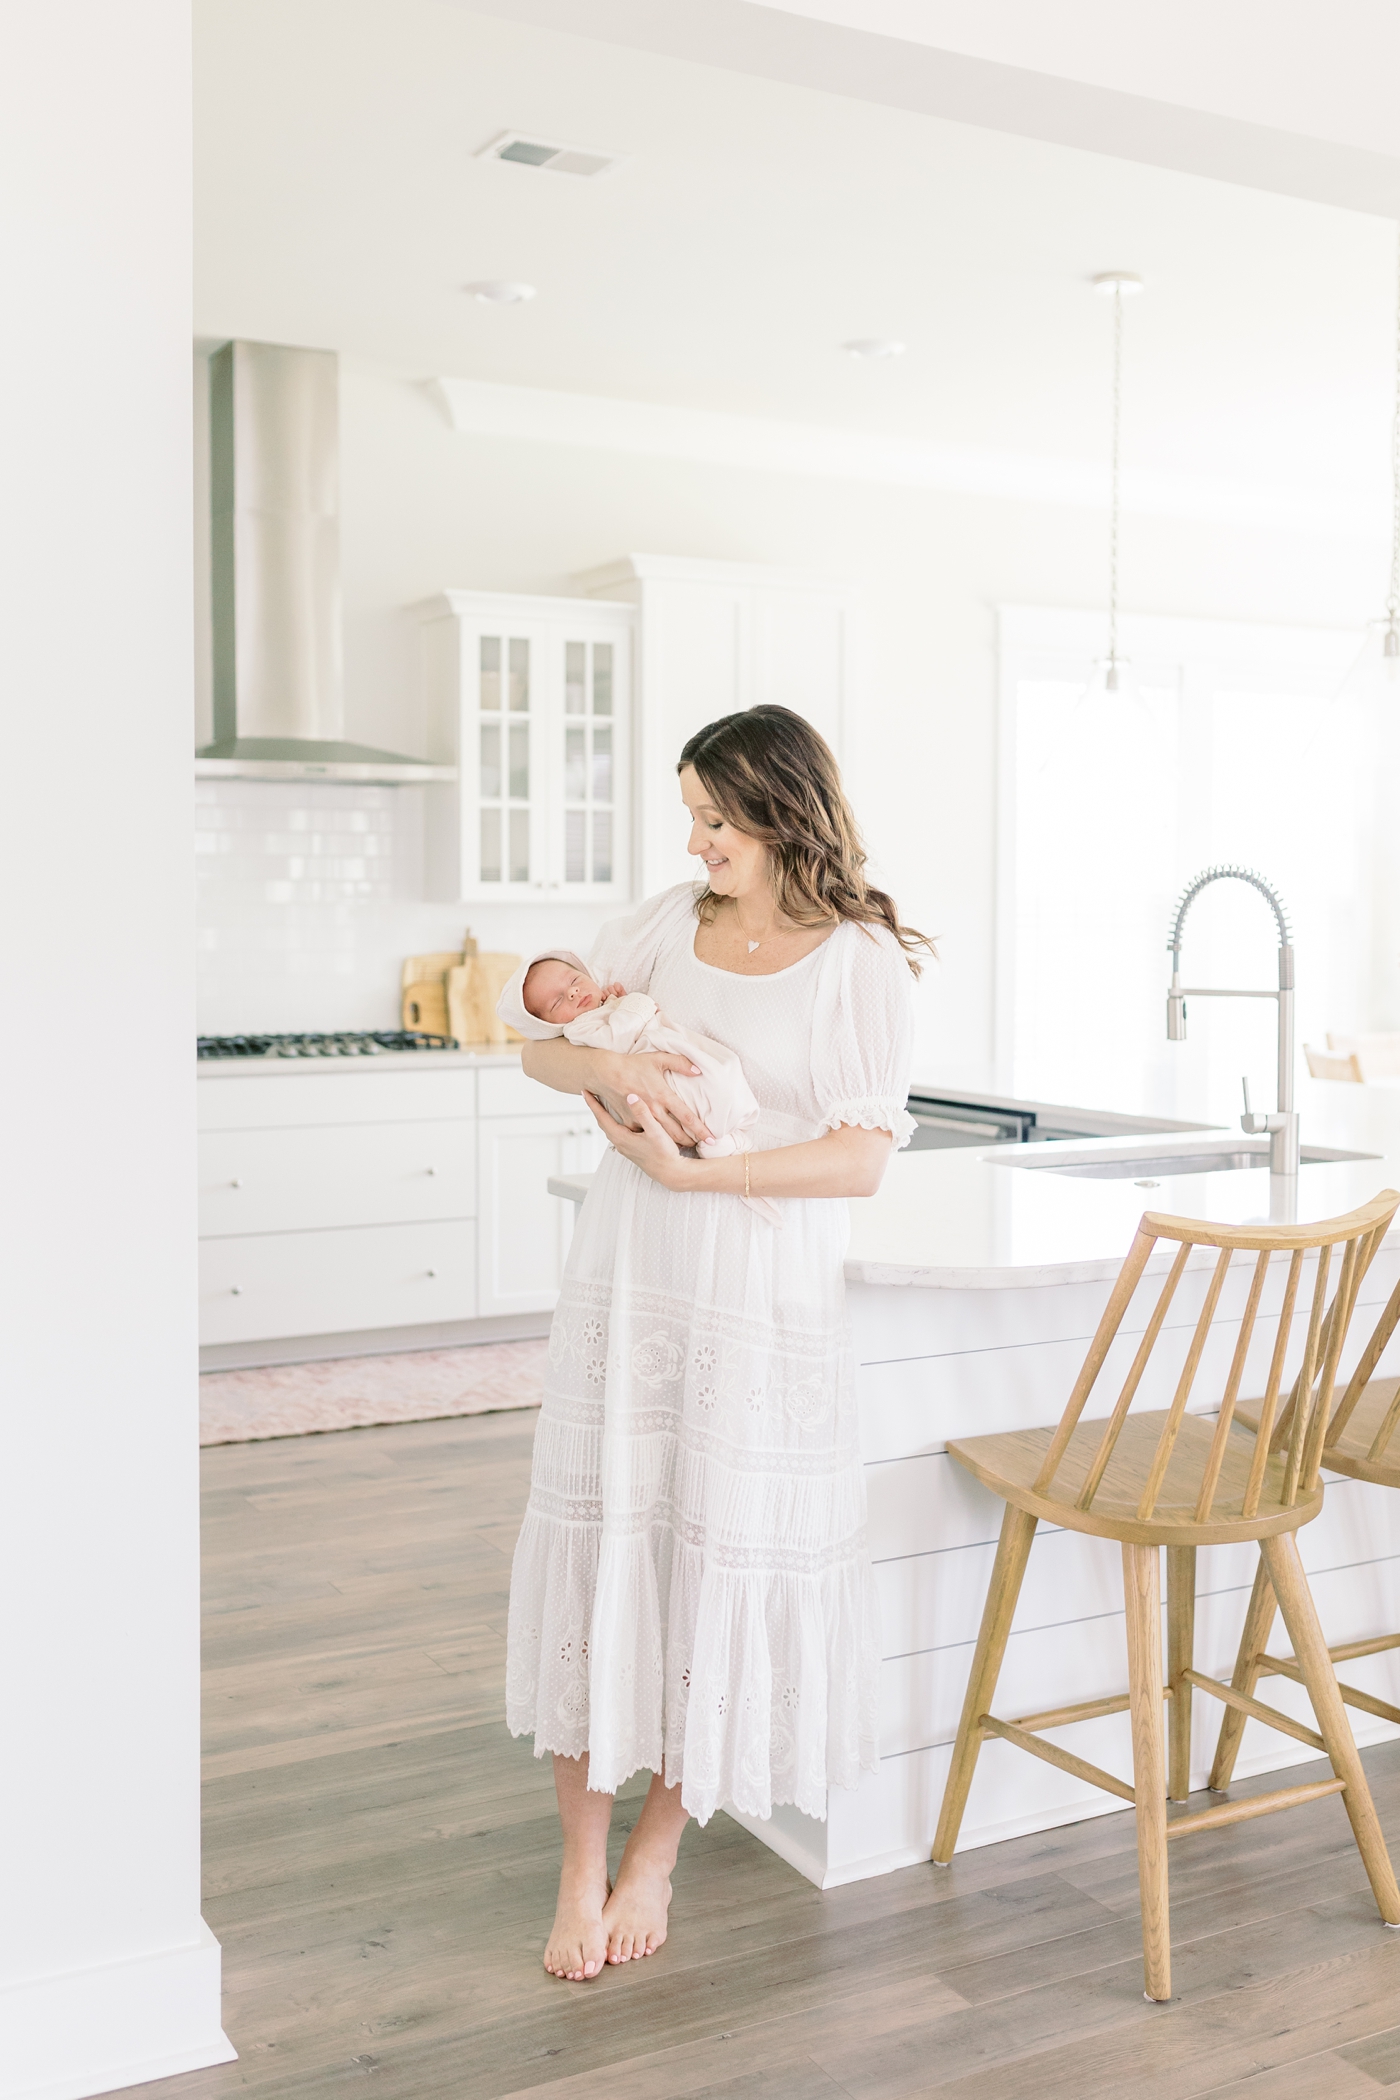 Mom holding her baby in the kitchen during their Lifestyle Newborn Session | Photo by Caitlyn Motycka Photography.